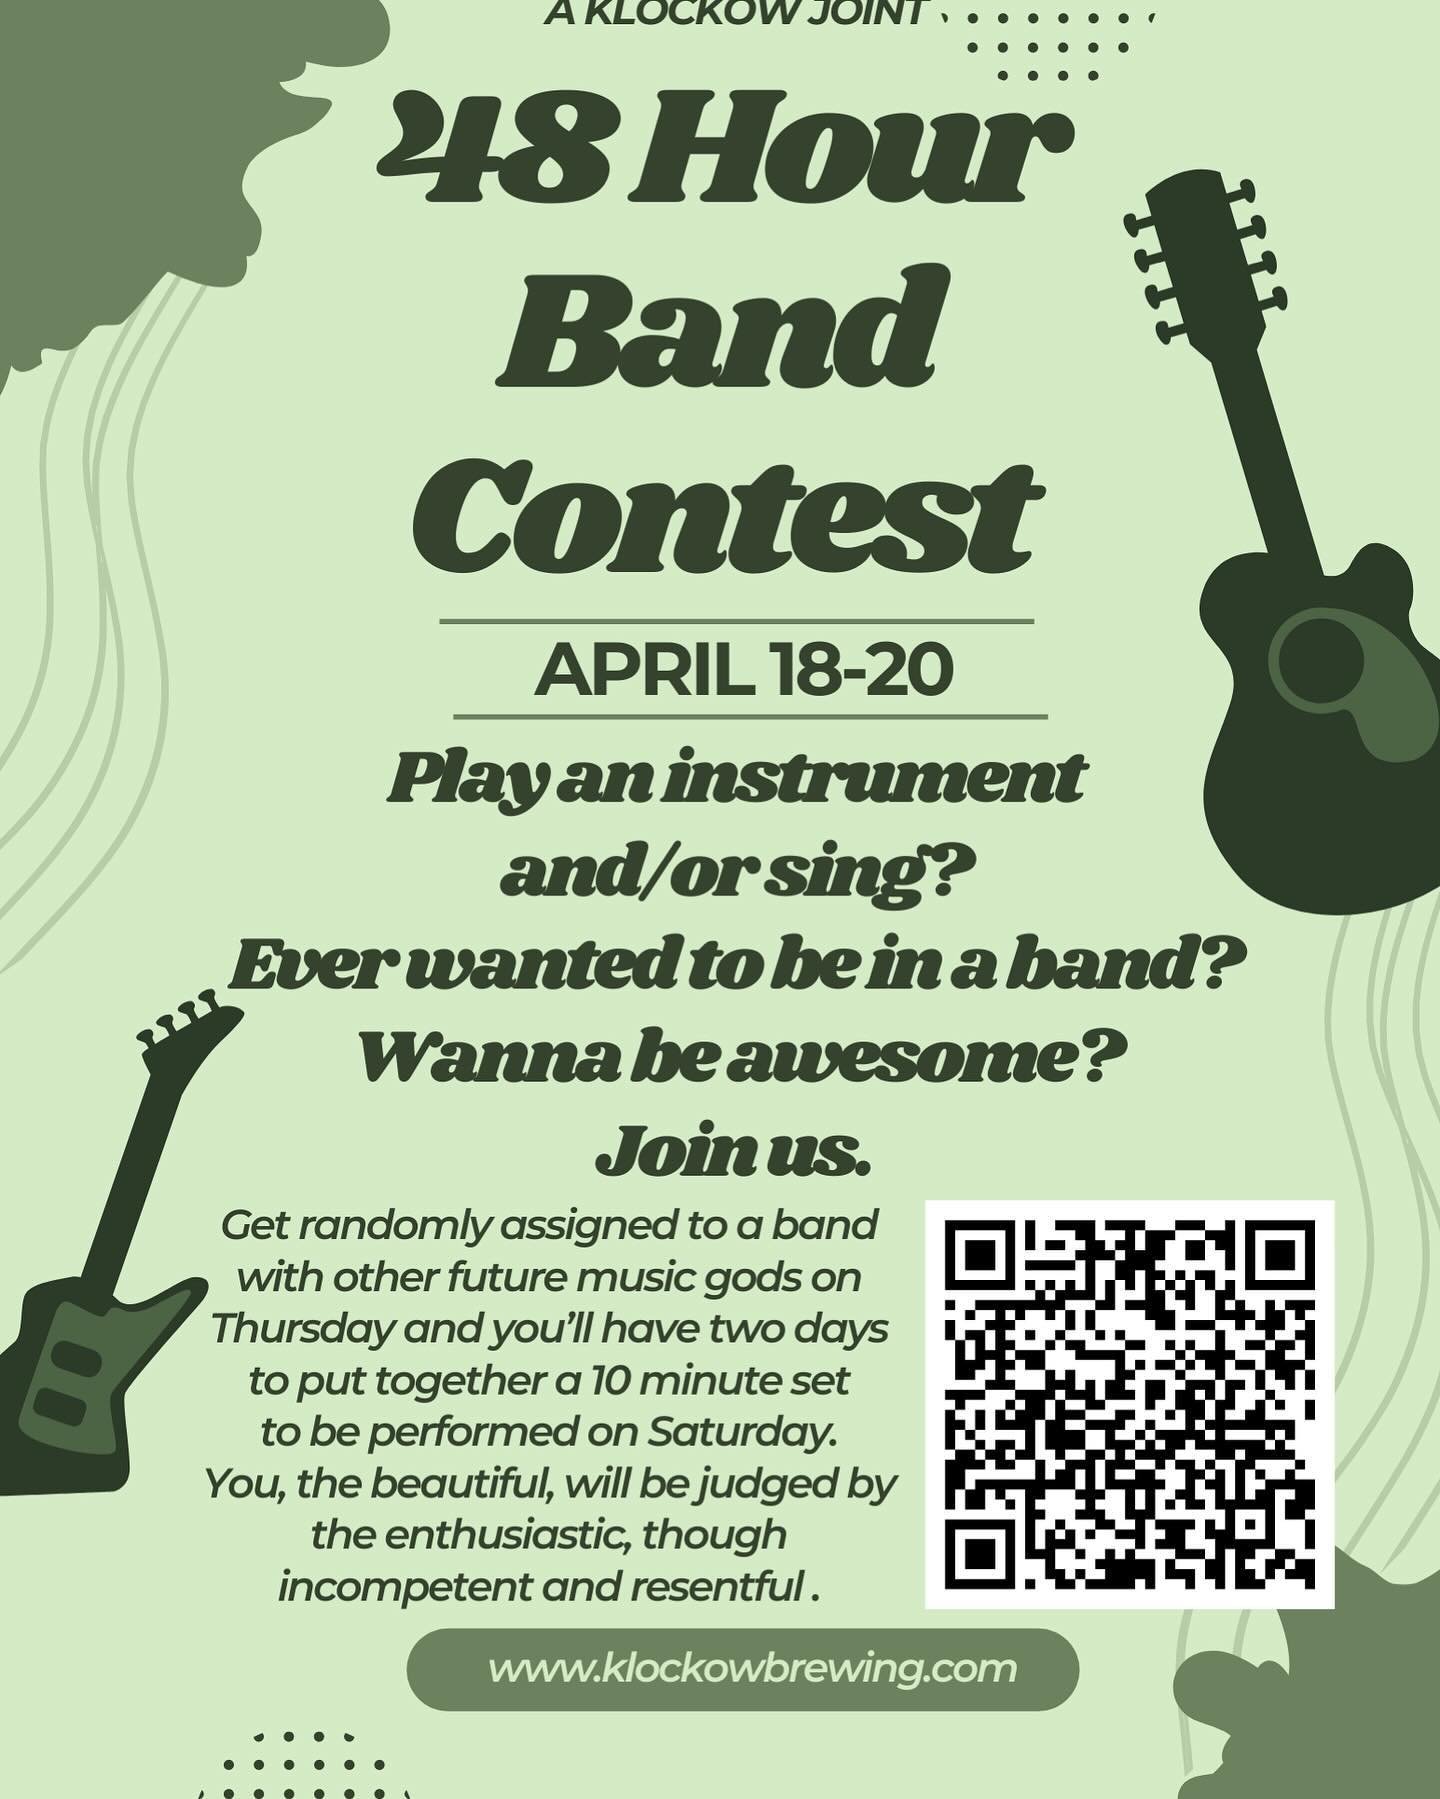 Can&rsquo;t wait to see all you beautiful musicians tomorrow, THURSDAY, at 6 pm! Your bands will no doubt be magnificent. 
As for the rest of you, can&rsquo;t wait to see you at 6 pm on Saturday for the grand performance of these future rock legends 